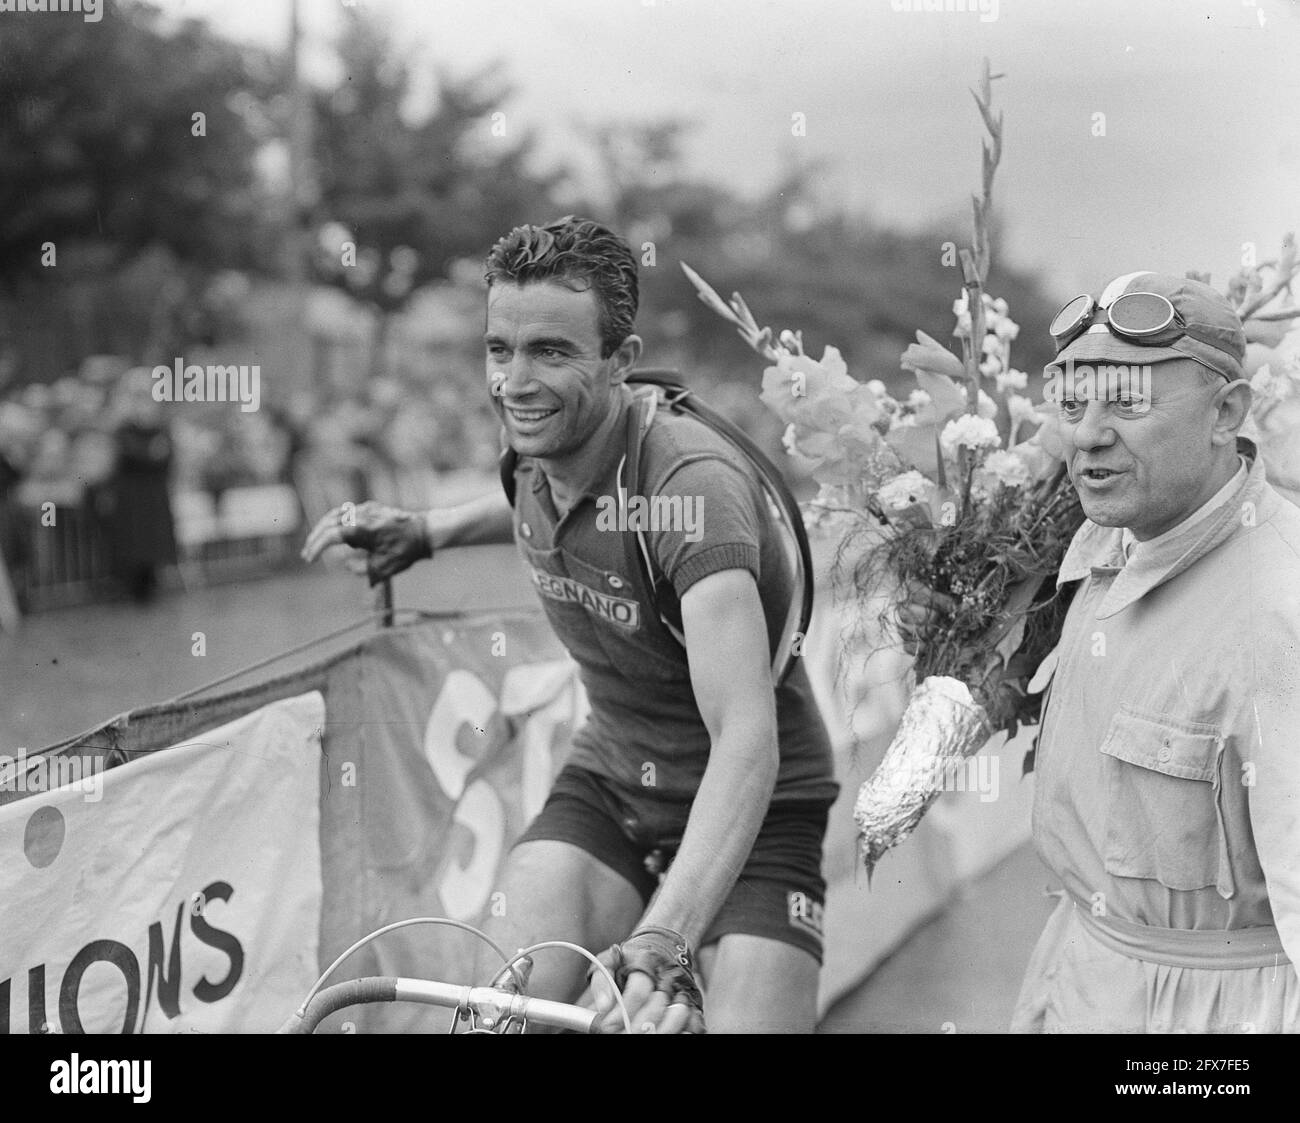 Adolfo Leoni, 1950 Tour de France, The Netherlands, 20th century press agency photo, news to remember, documentary, historic photography 1945-1990, visual stories, human history of the Twentieth Century, capturing moments in time Stock Photo